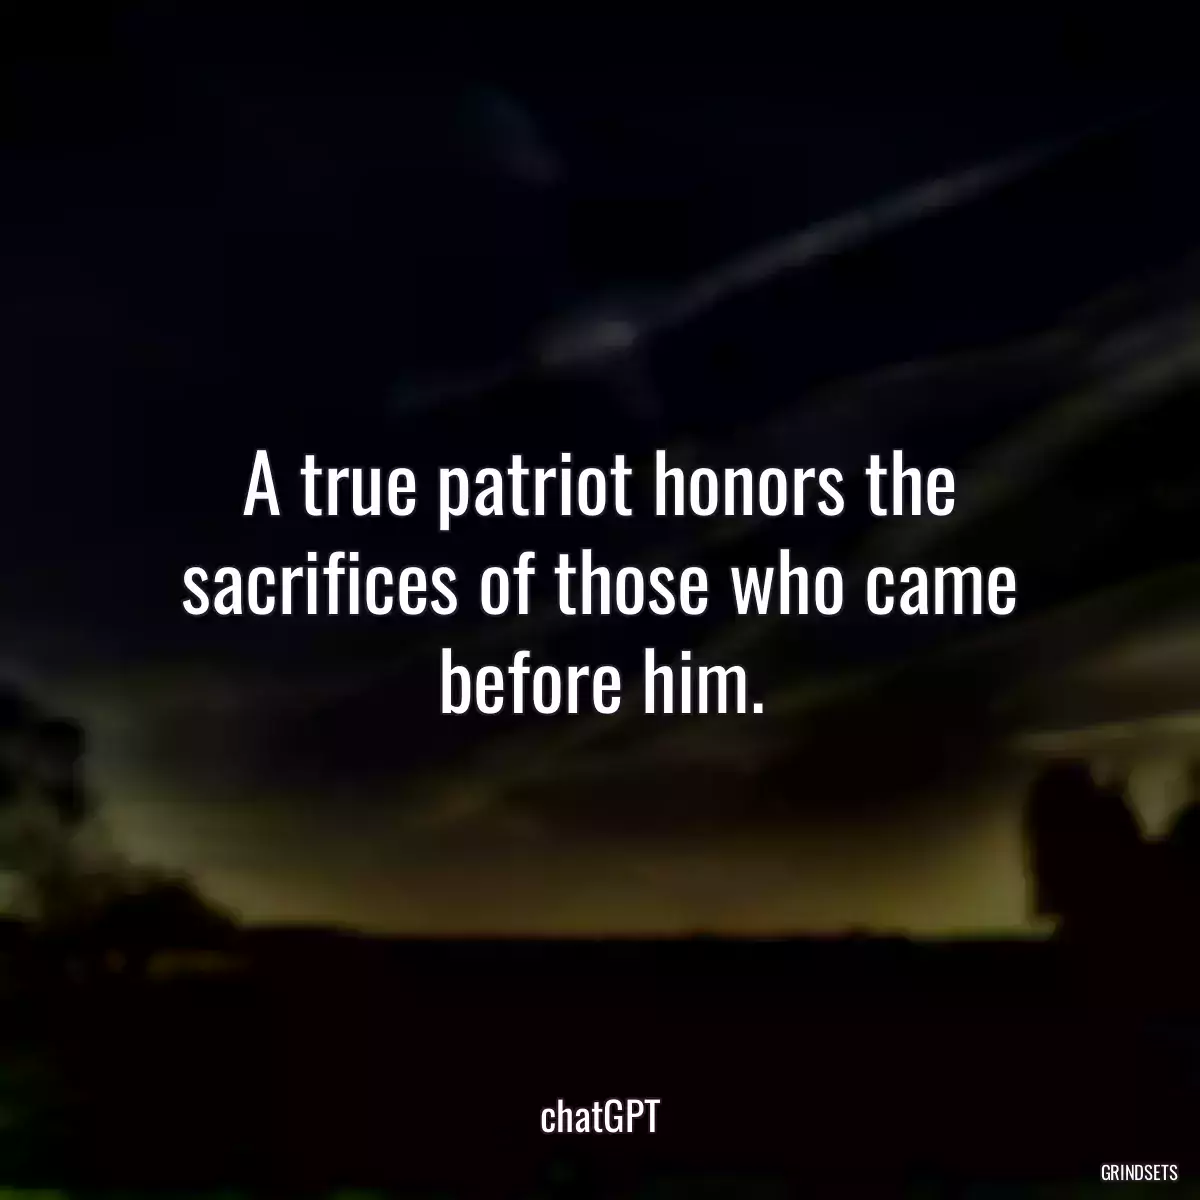 A true patriot honors the sacrifices of those who came before him.